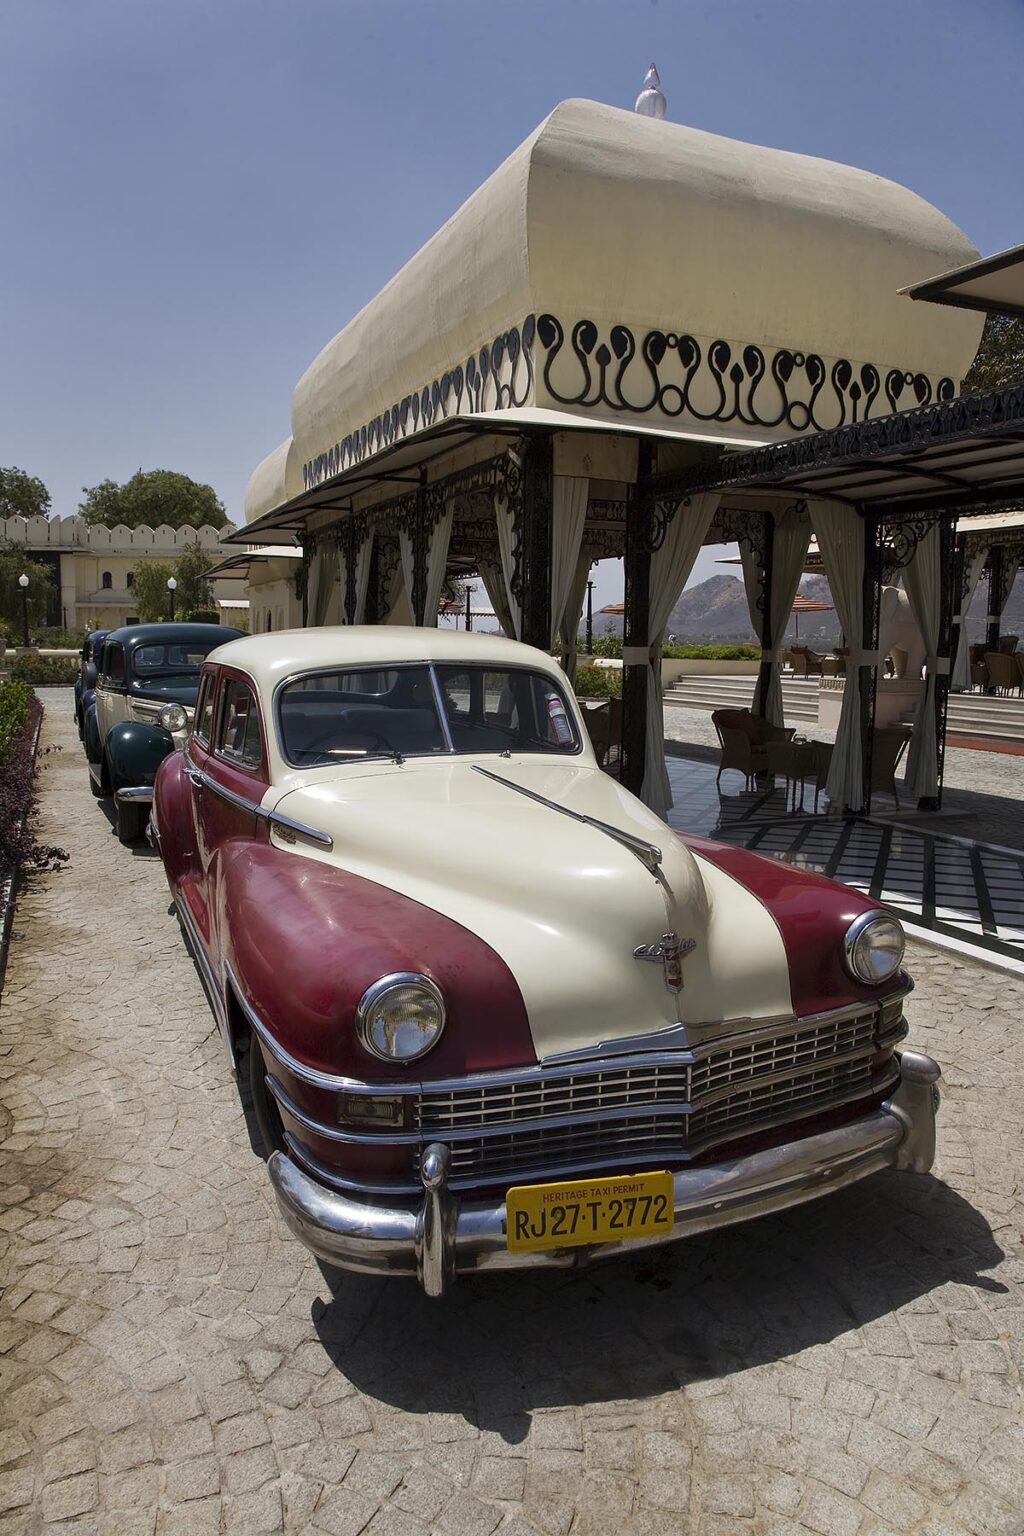 A VINTAGE 1950s CHRYSLER is available for guests at the CITY PALACE of UDAIPUR - RAJASTHAN, INDIA